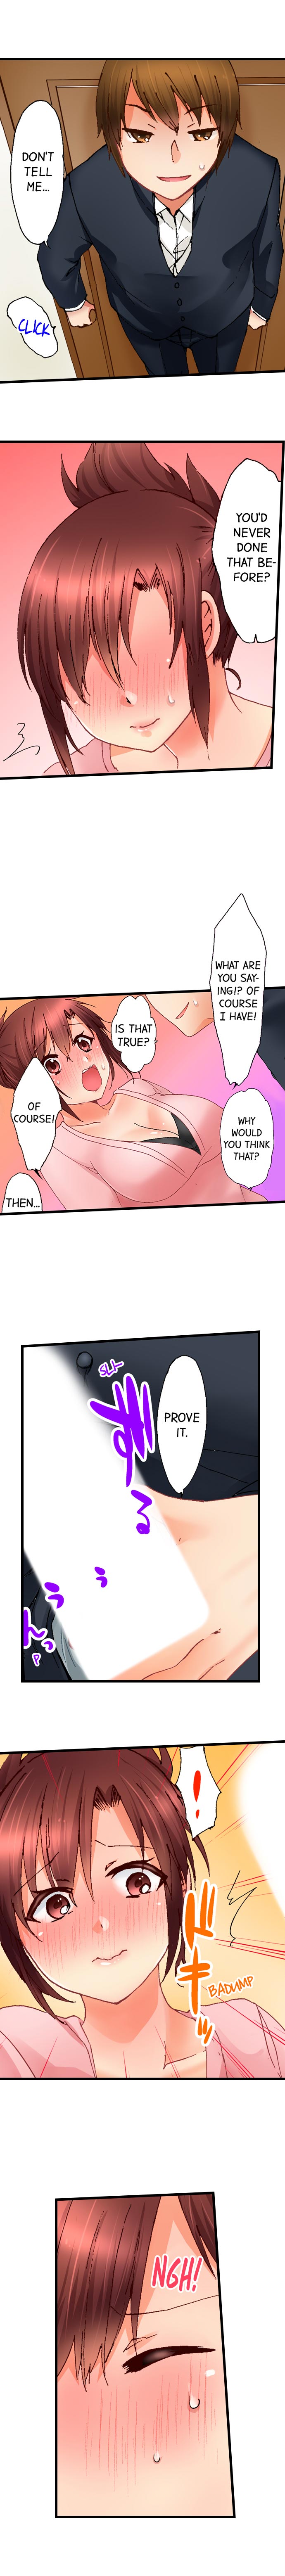 Touching My Older Sister Under the Table - Chapter 3 Page 5